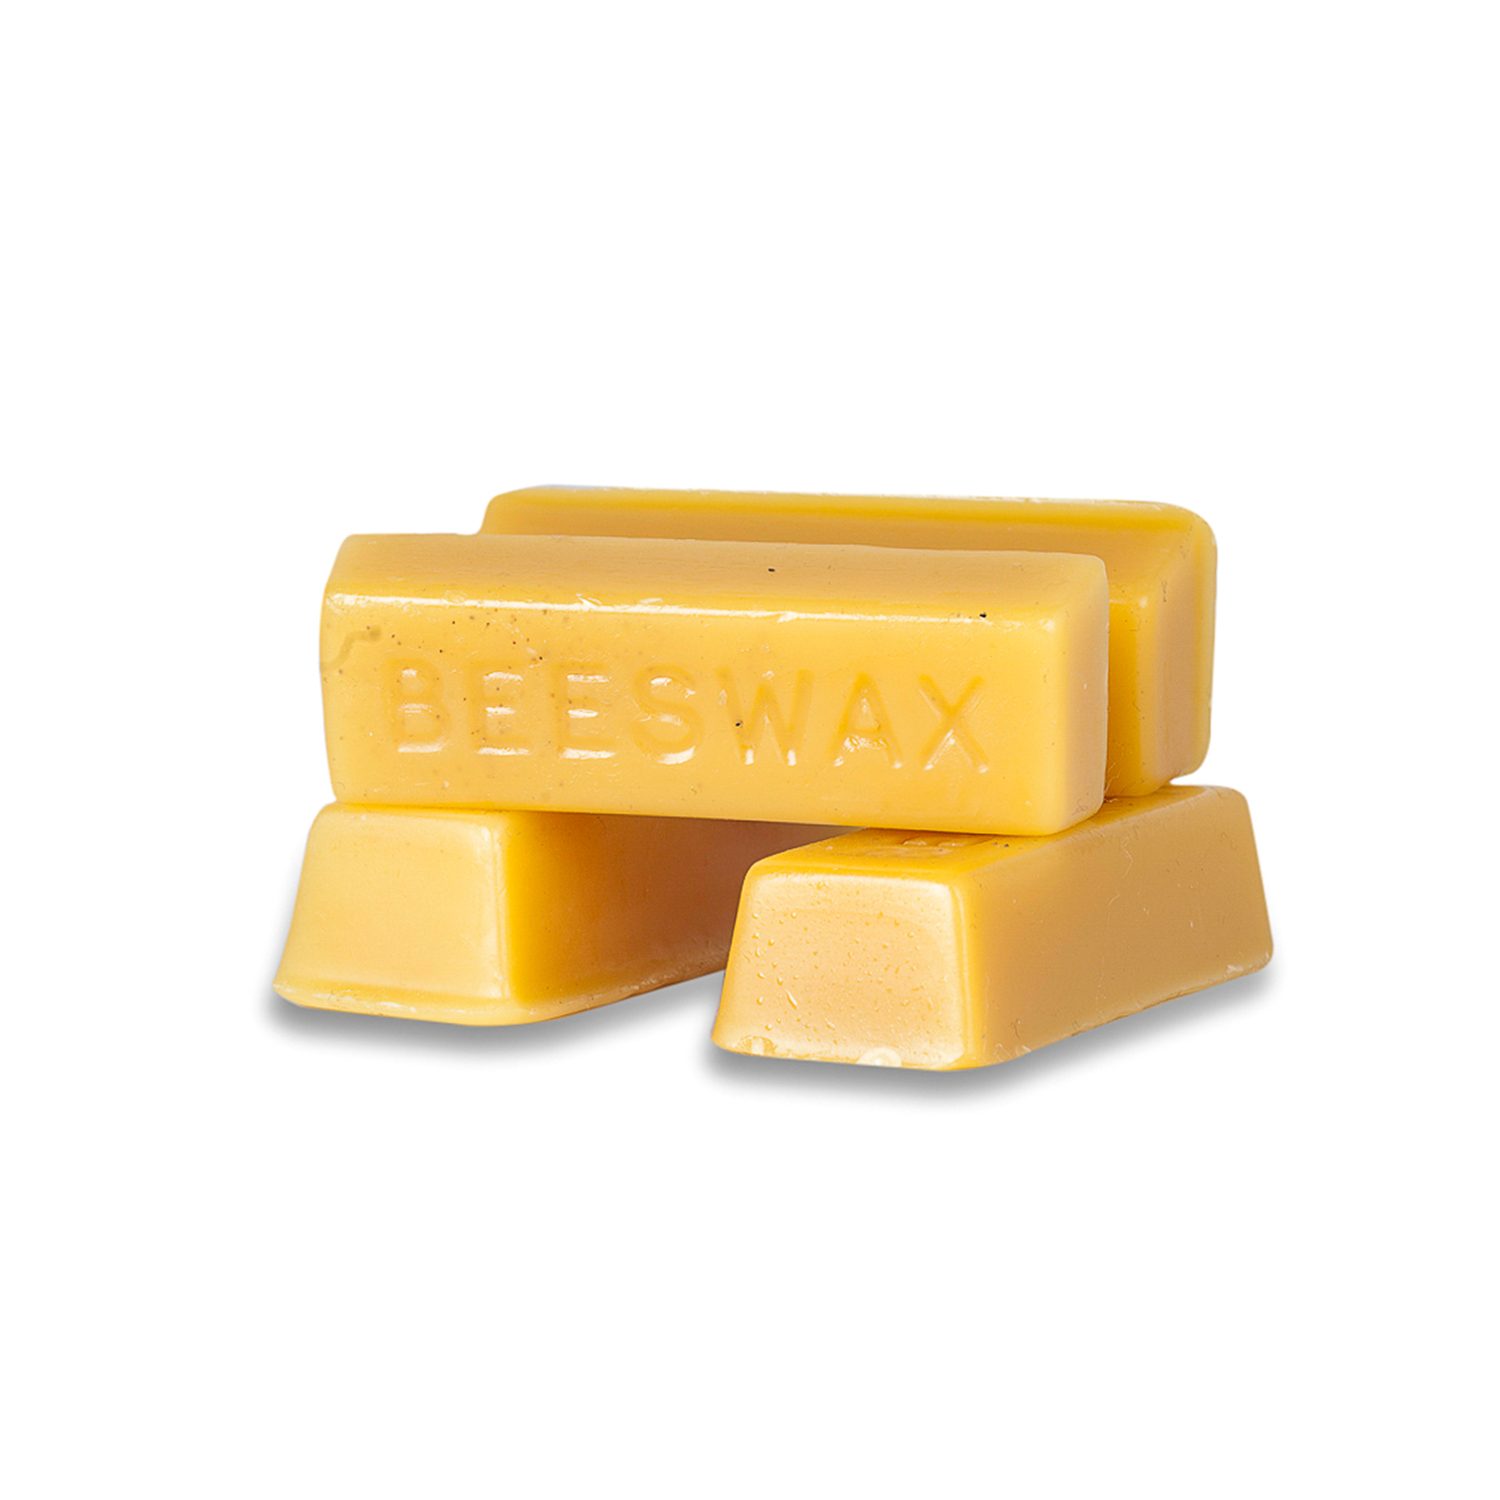 BEESWAX BAR - Weaver's Orchard